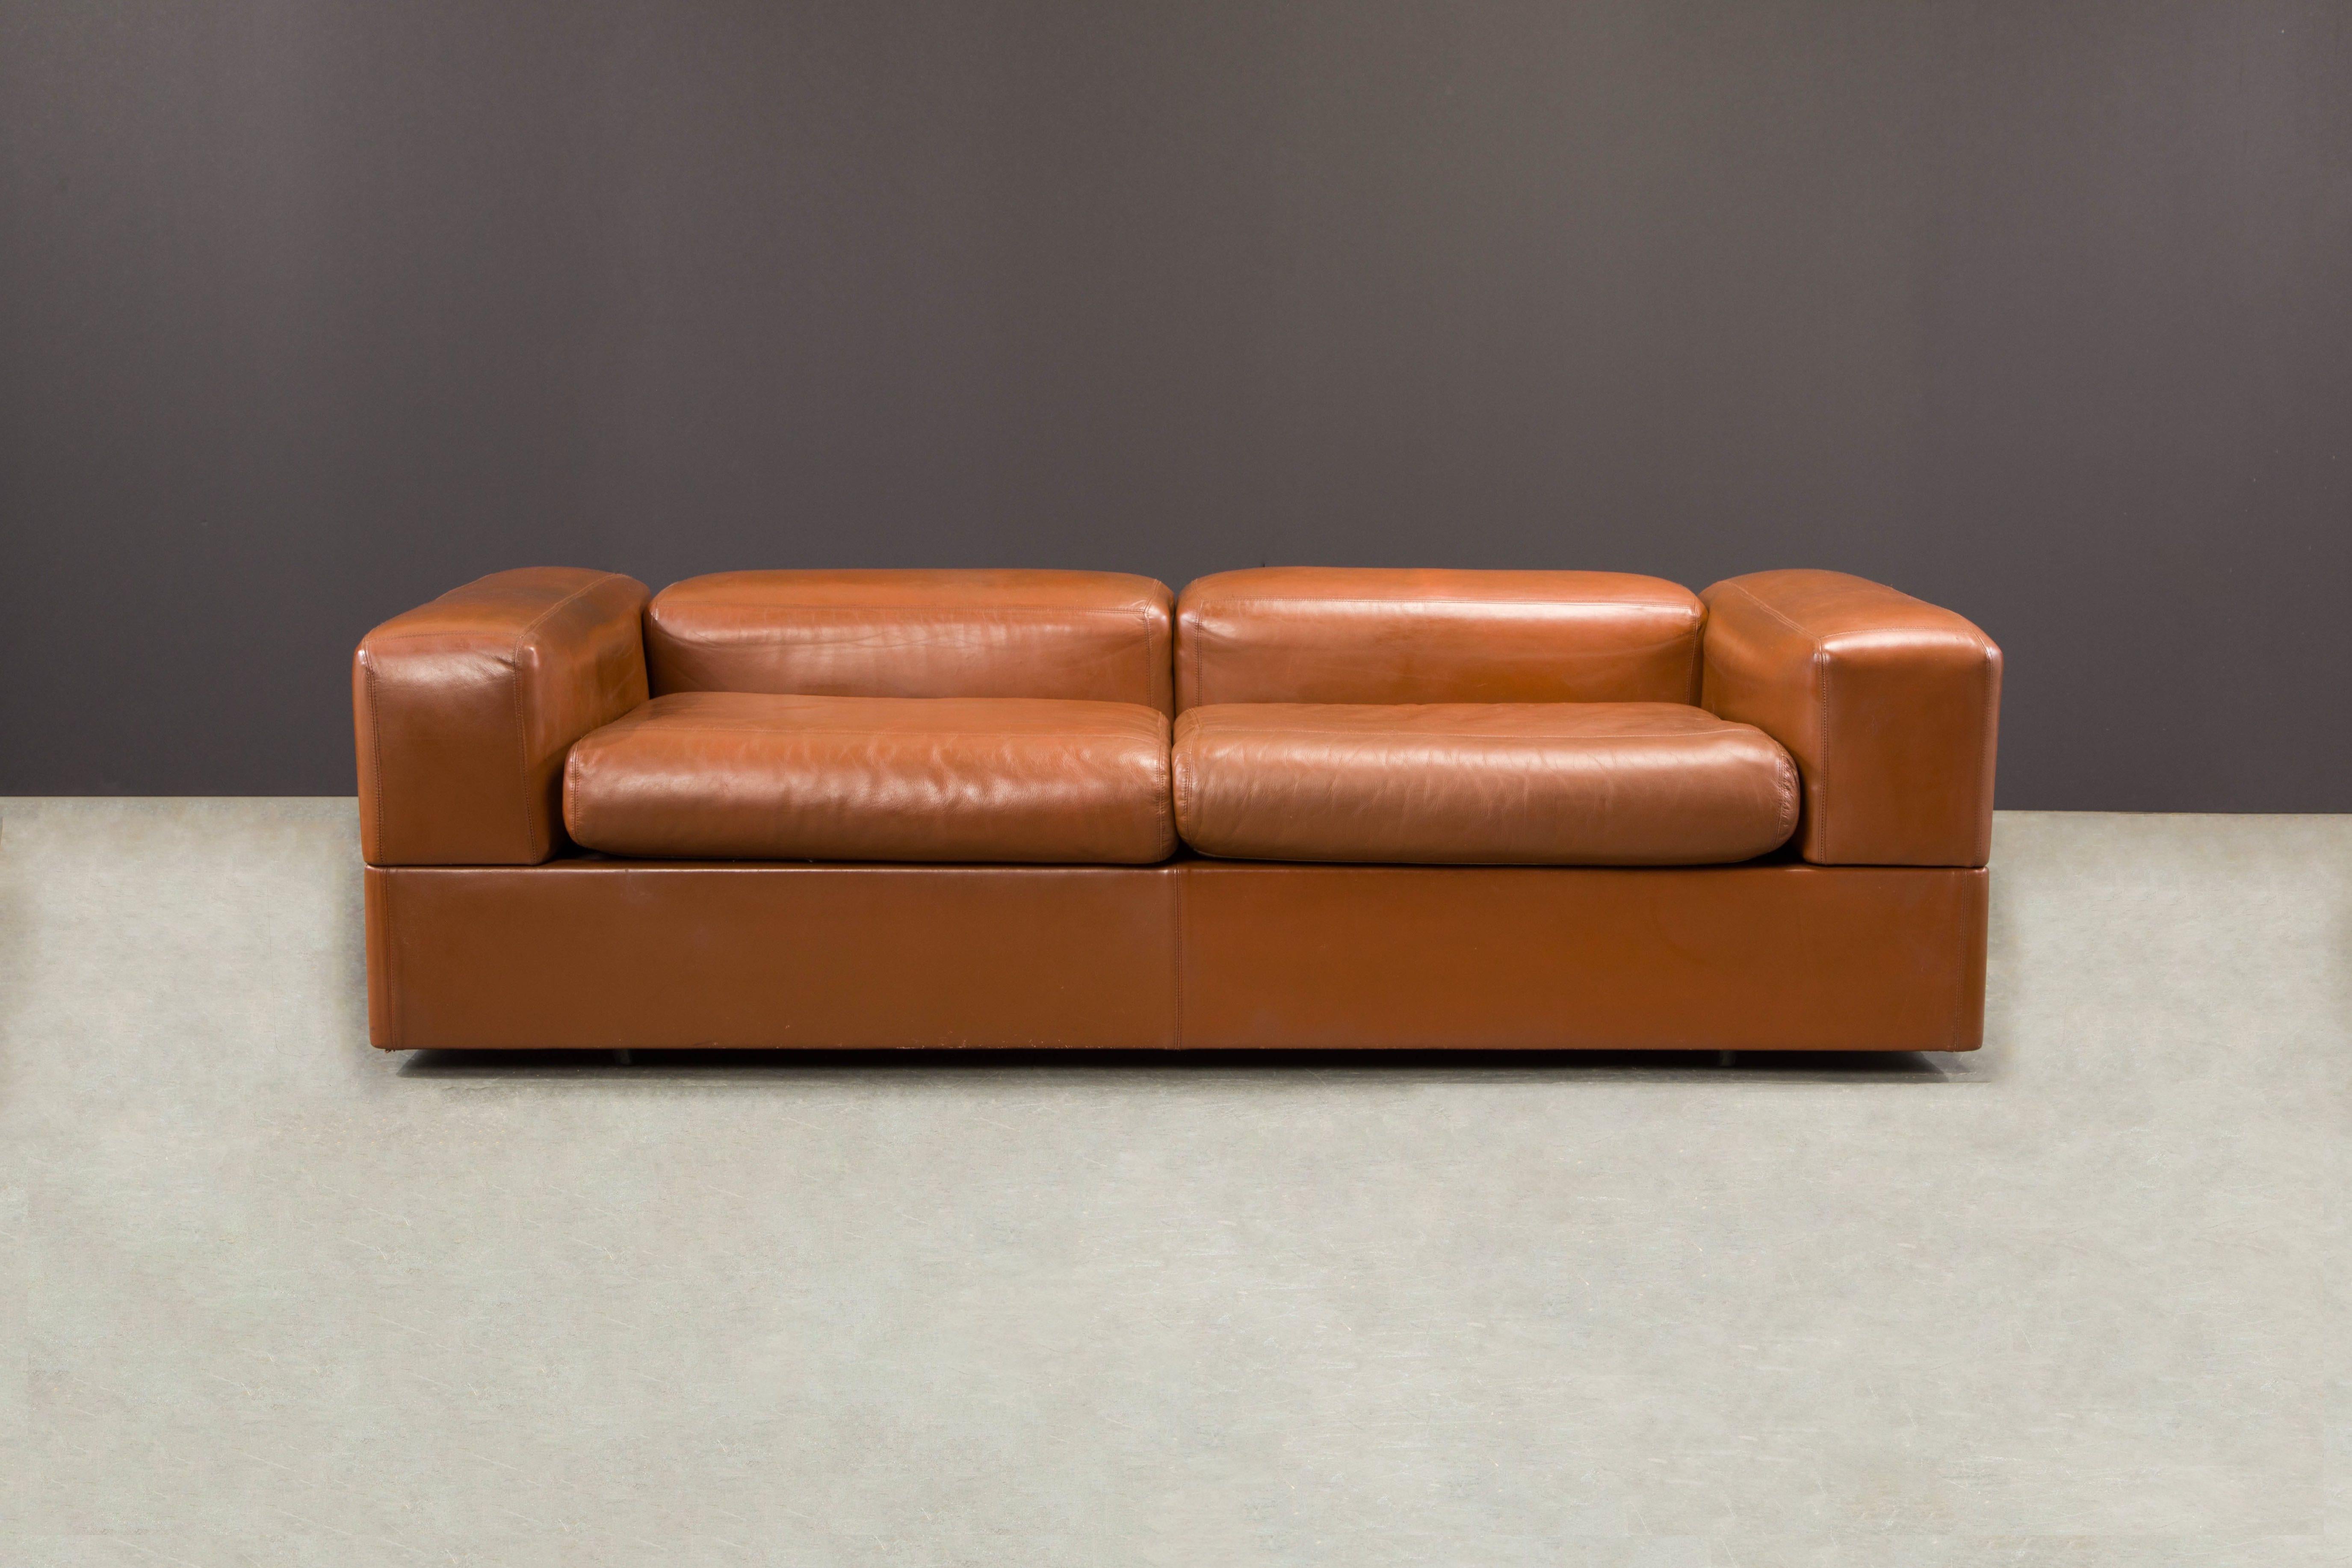 Steel Pair of Tito Agnoli Leather Convertible Sofas for Cinova, 1960s Italy, Signed